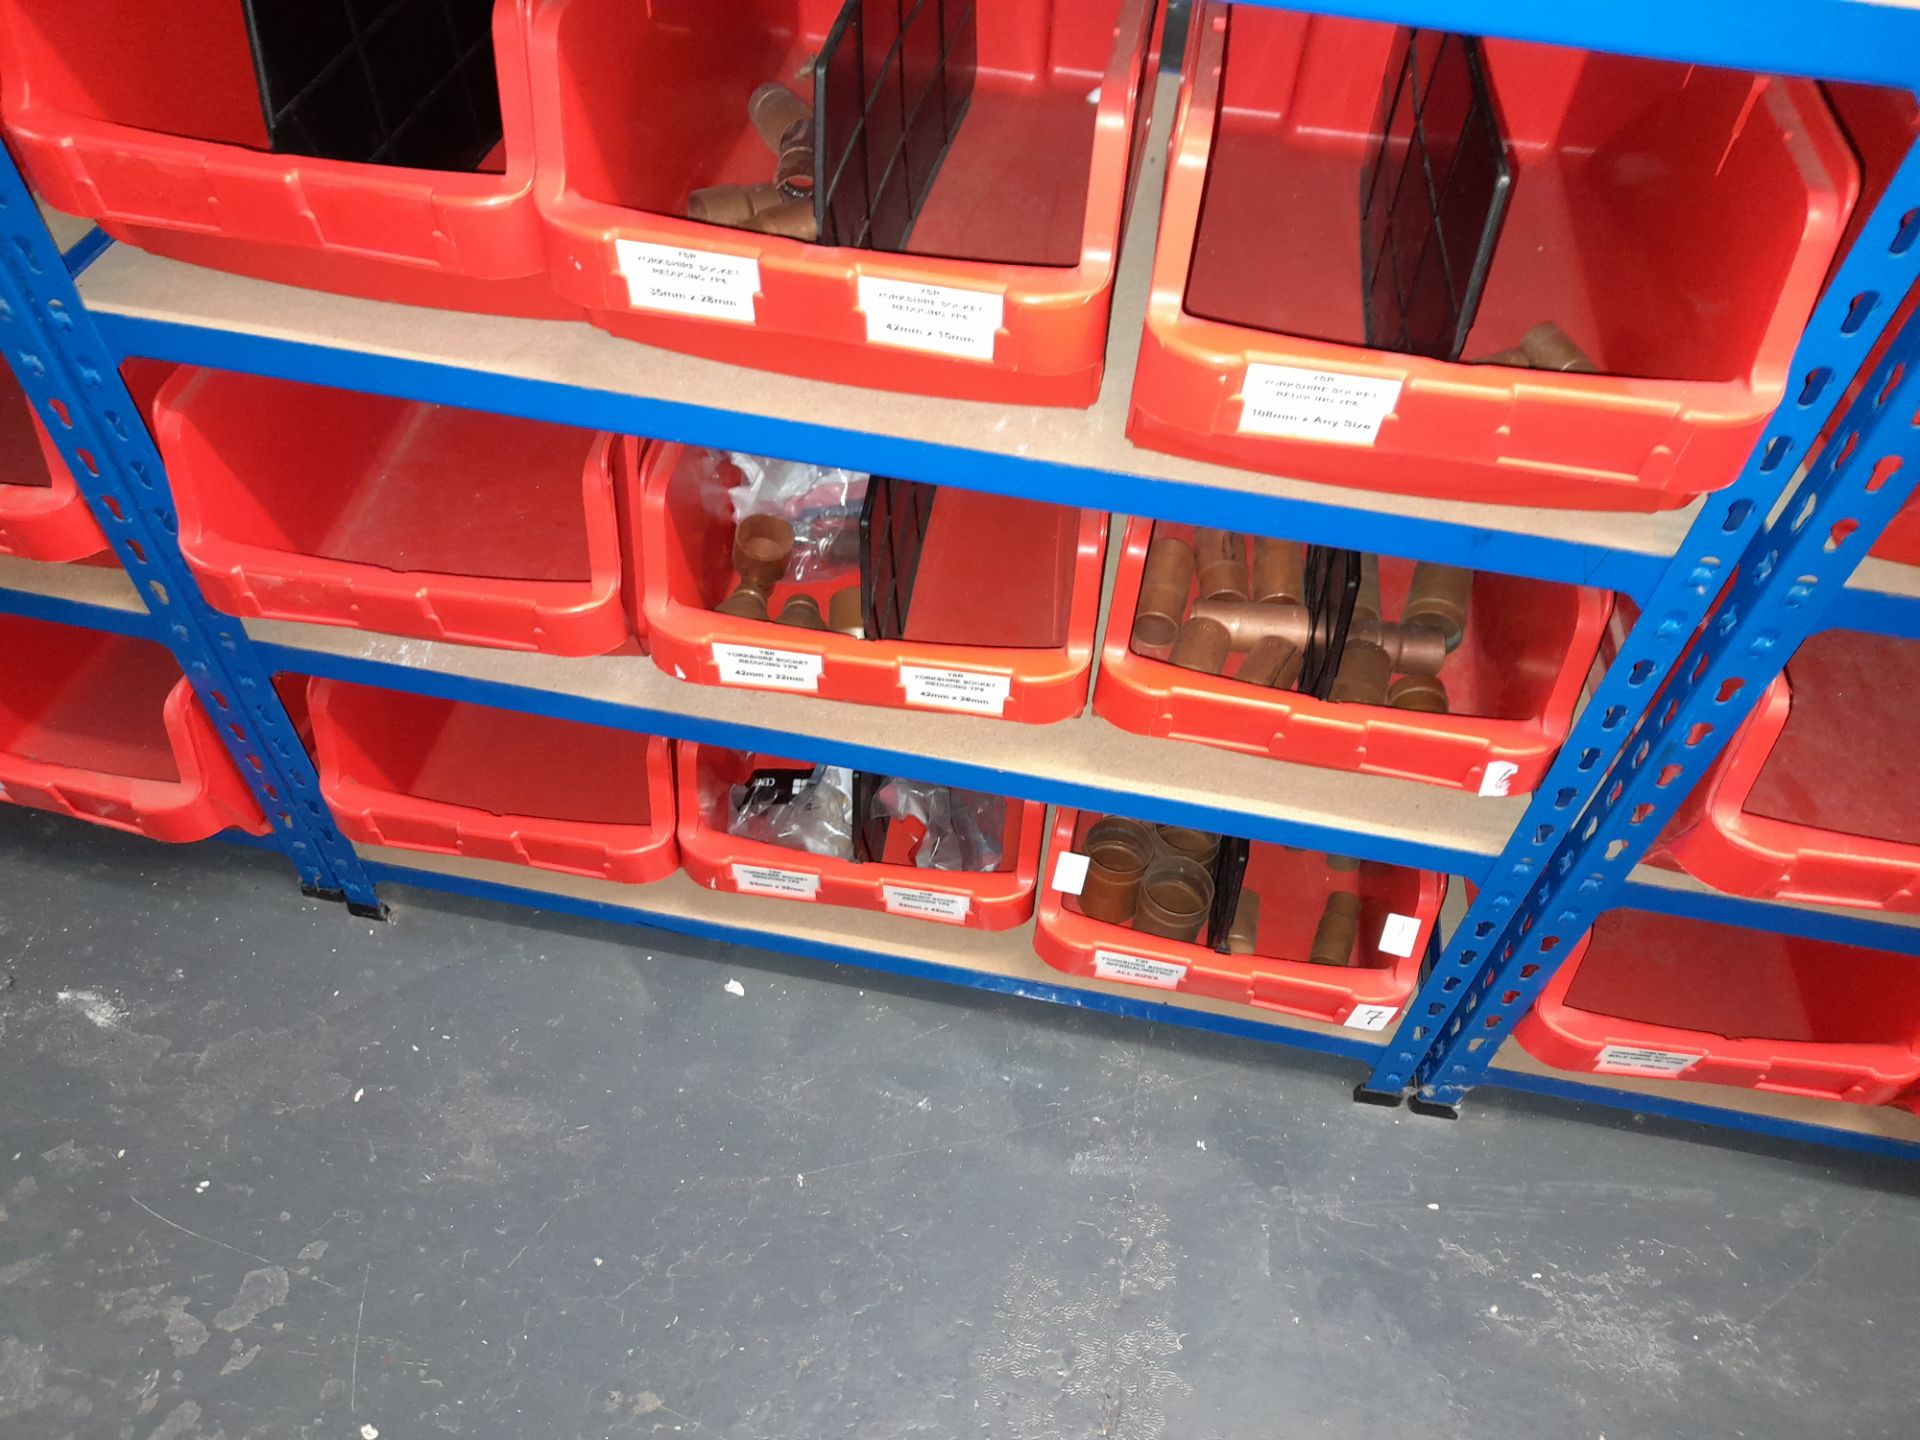 Large quantity of stock to 7 bays of racking to include Yorkshire Tee reducing fittings, connectors, - Image 13 of 19